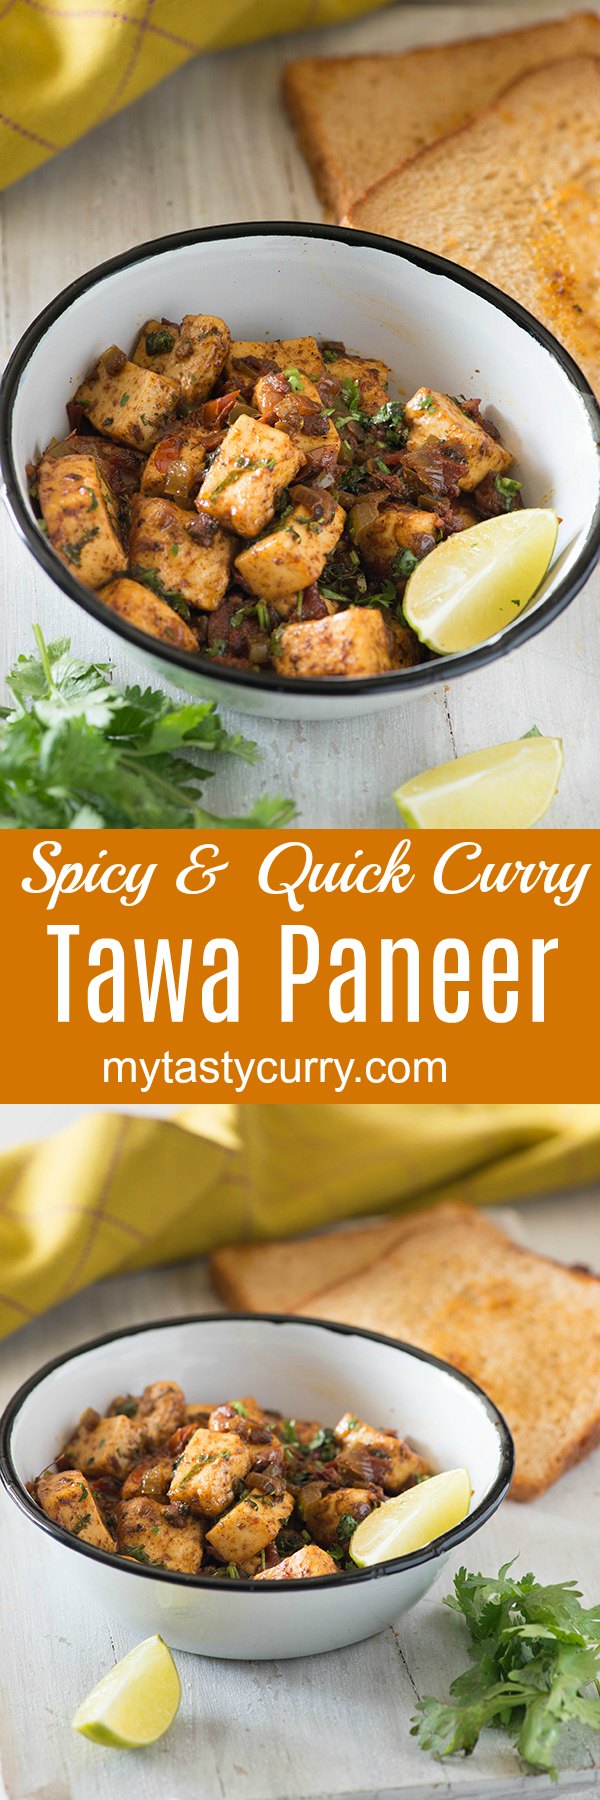 Tawa Paneer recipe which is easy to make tastes delicious and can be made in 20 Minutes. Tawa Paneer dry recipe as the name suggests is made on Tawa/tava which is a griddle with a slight concave surface in the middle.